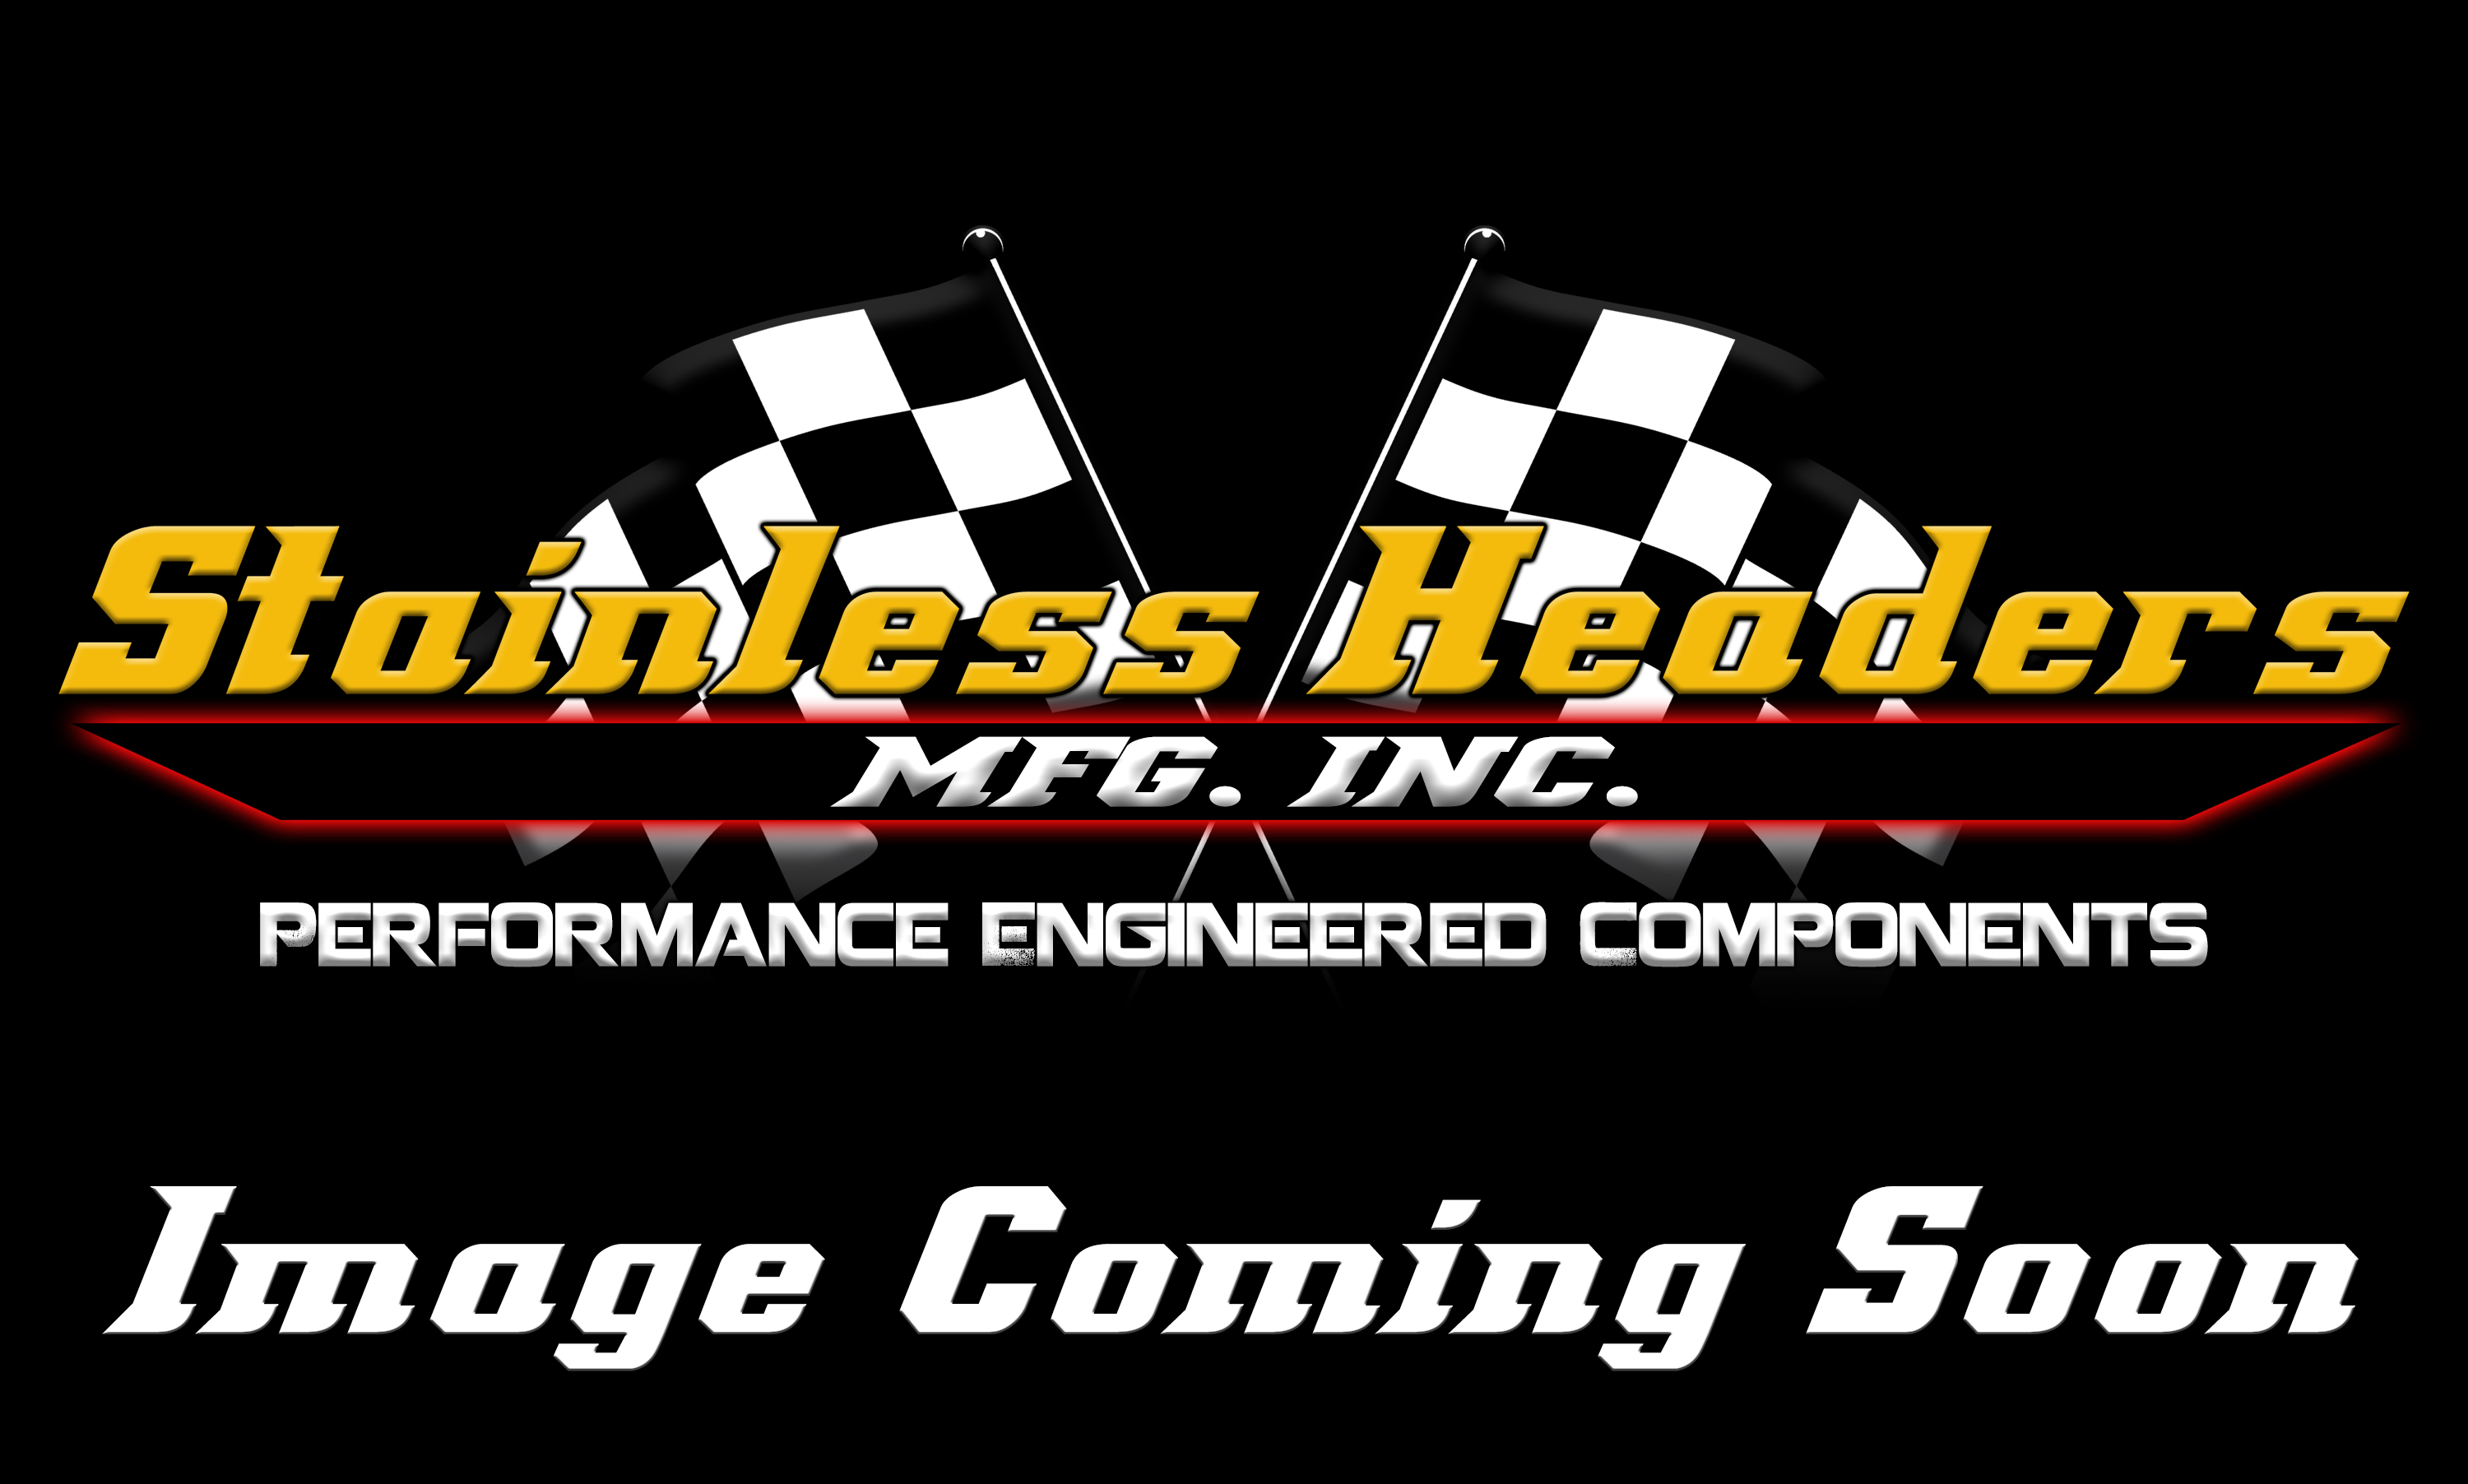 Merge Collectors - 321 Stainless Steel Merge Collectors - Stainless Headers - 2 1/8" Primary 4 into 1 Performance Merge Collector-16ga 321ss